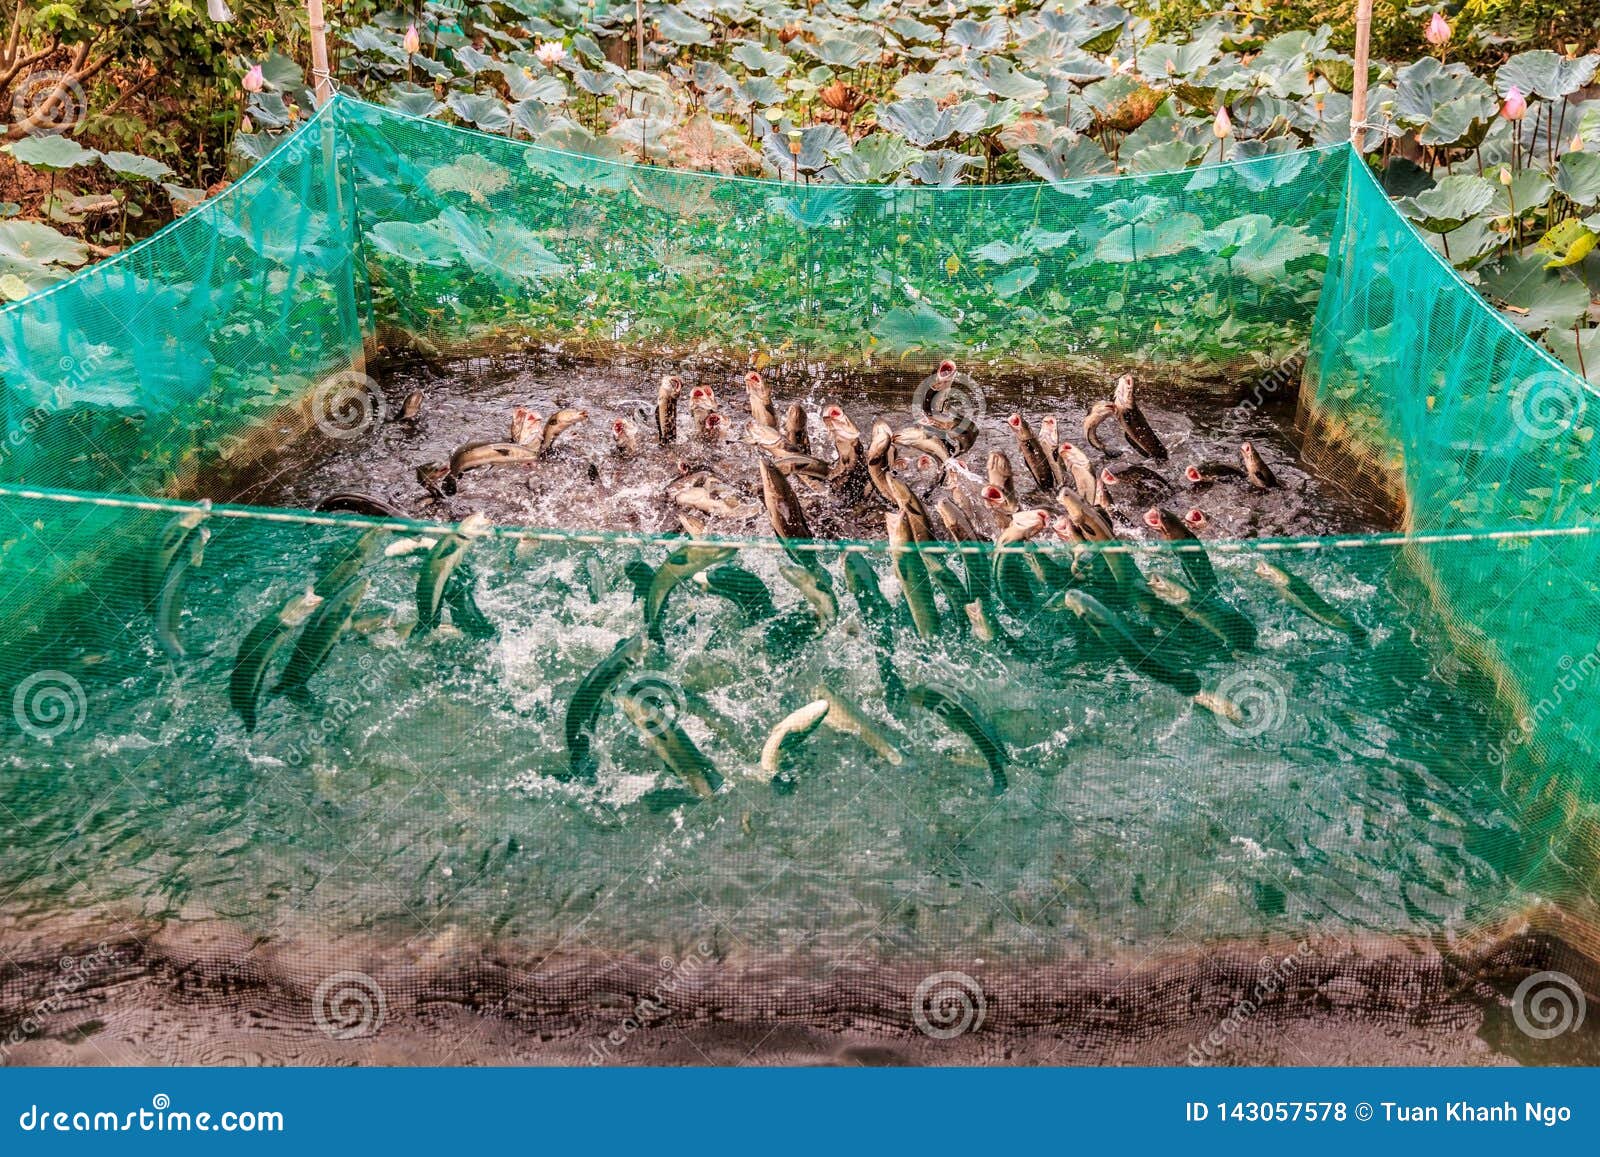 Fish jumping out of the water in Can Tho, Mekong Delta, Vietnam.